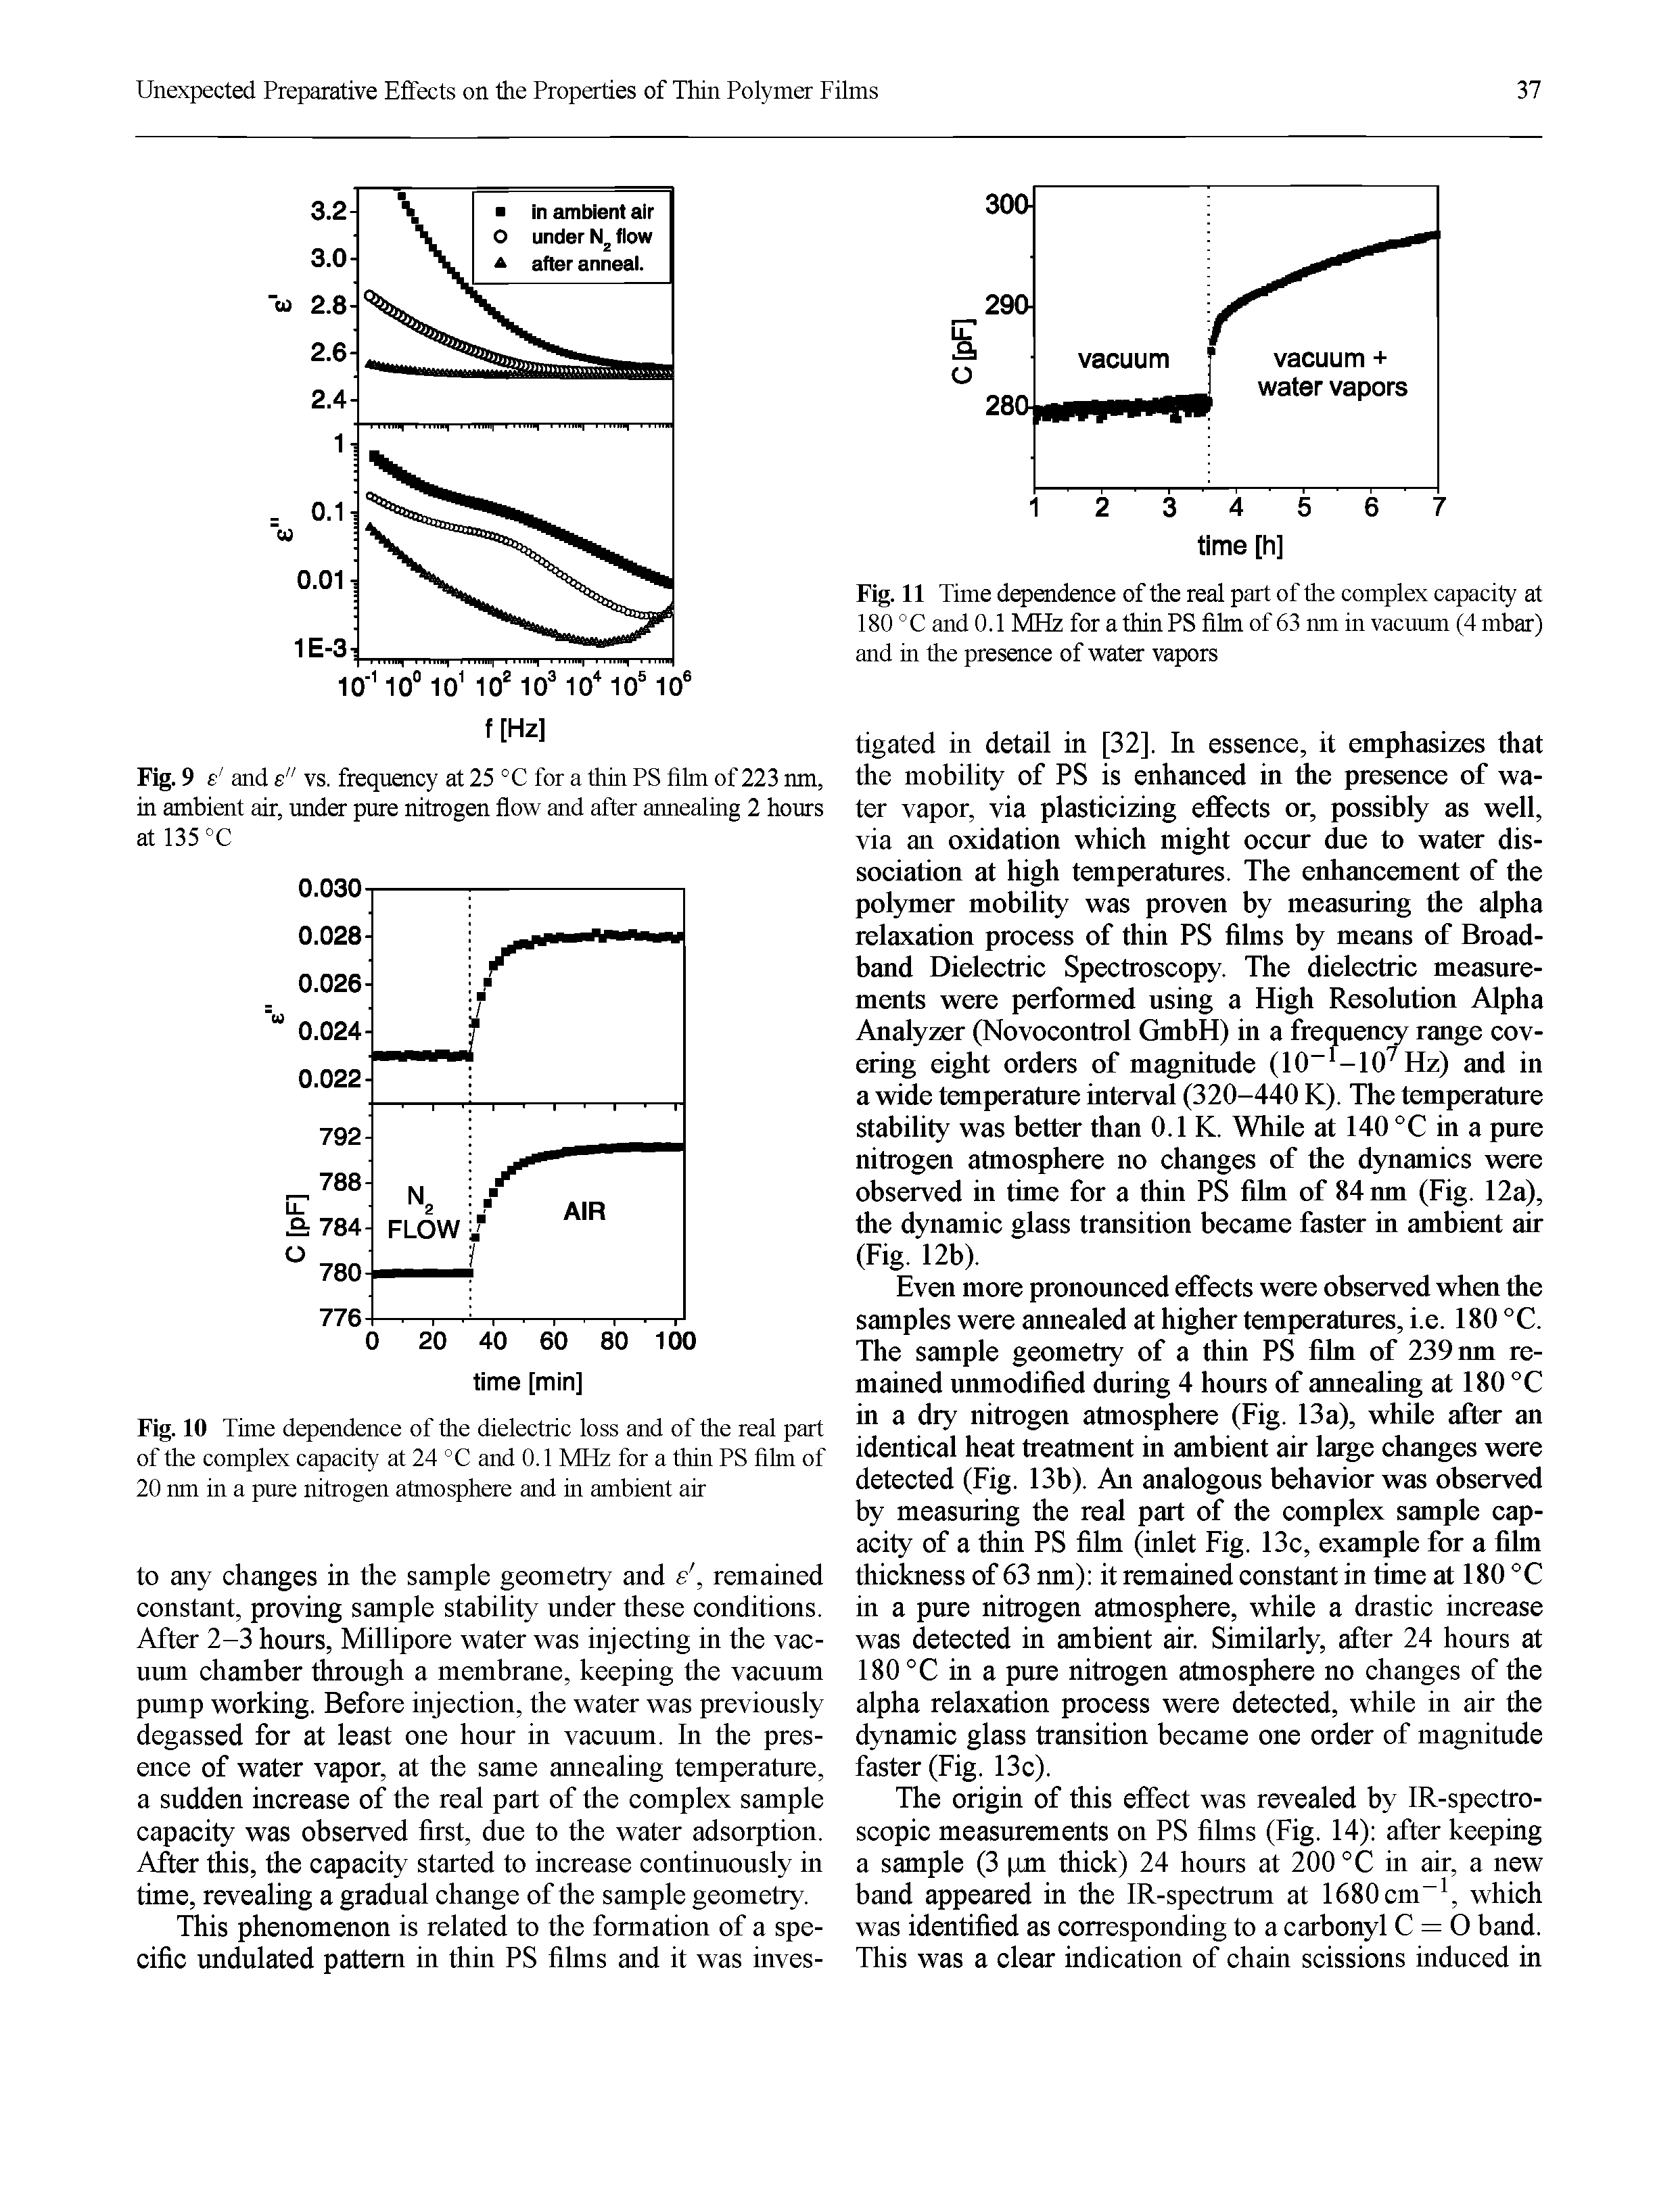 Fig. 10 Time dependence of the dielectric loss and of the real part of the complex capacity at 24 °C and 0.1 MHz for a thin PS film of 20 nm in a pure nitrogen atmosphere and in ambient air...